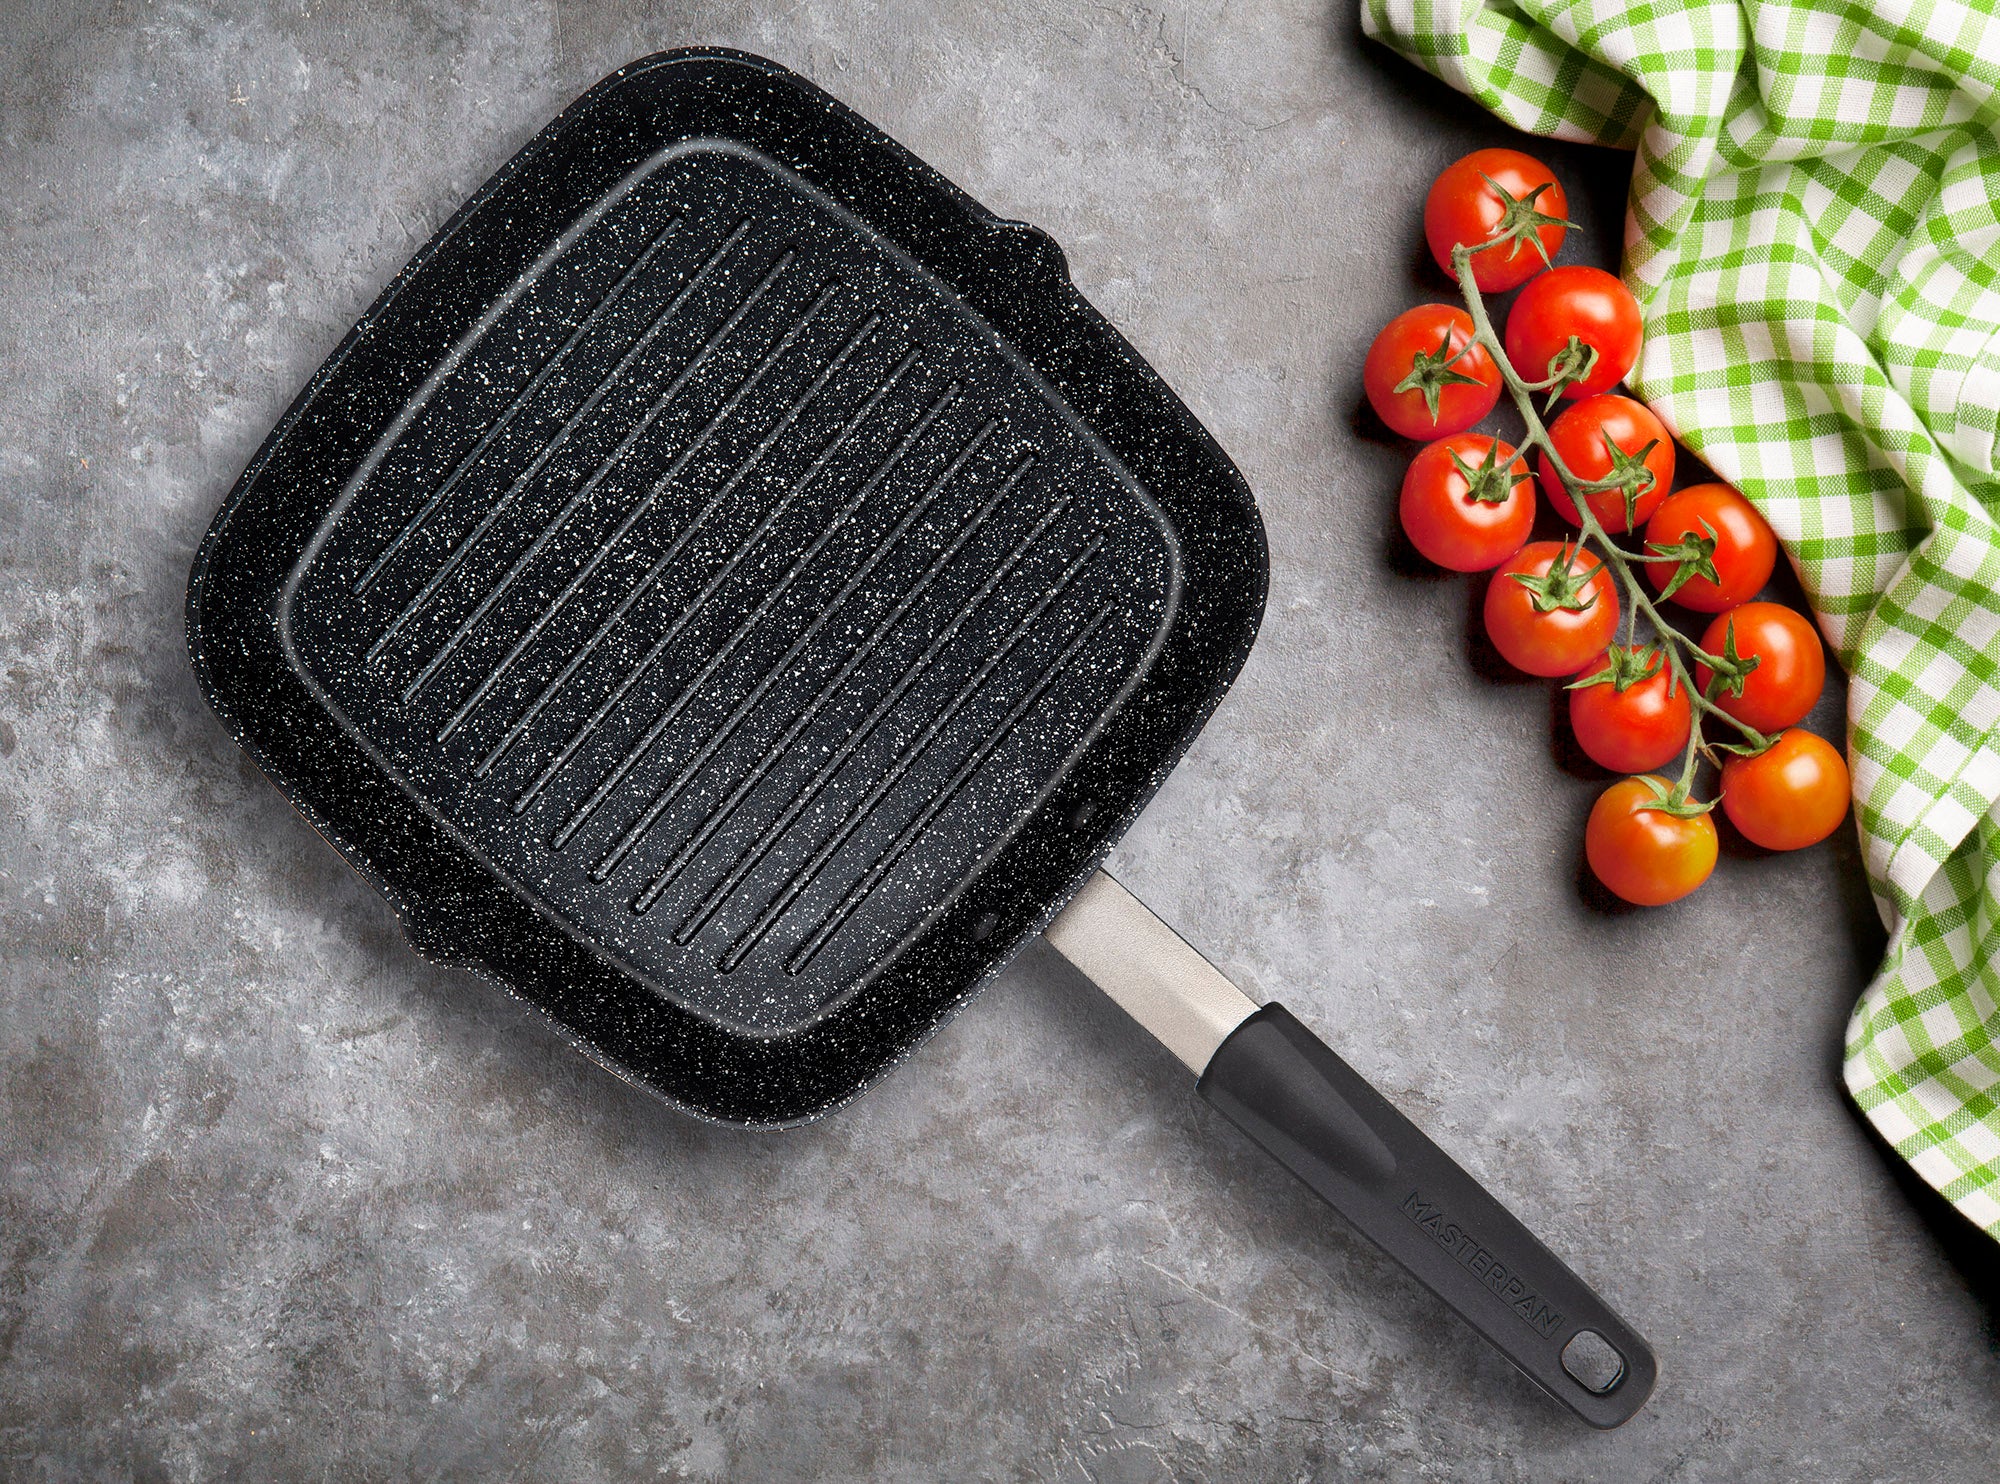 Eco+Chef Marble Steel 10 Inch Grill Pan Non Stick Carbon Steel